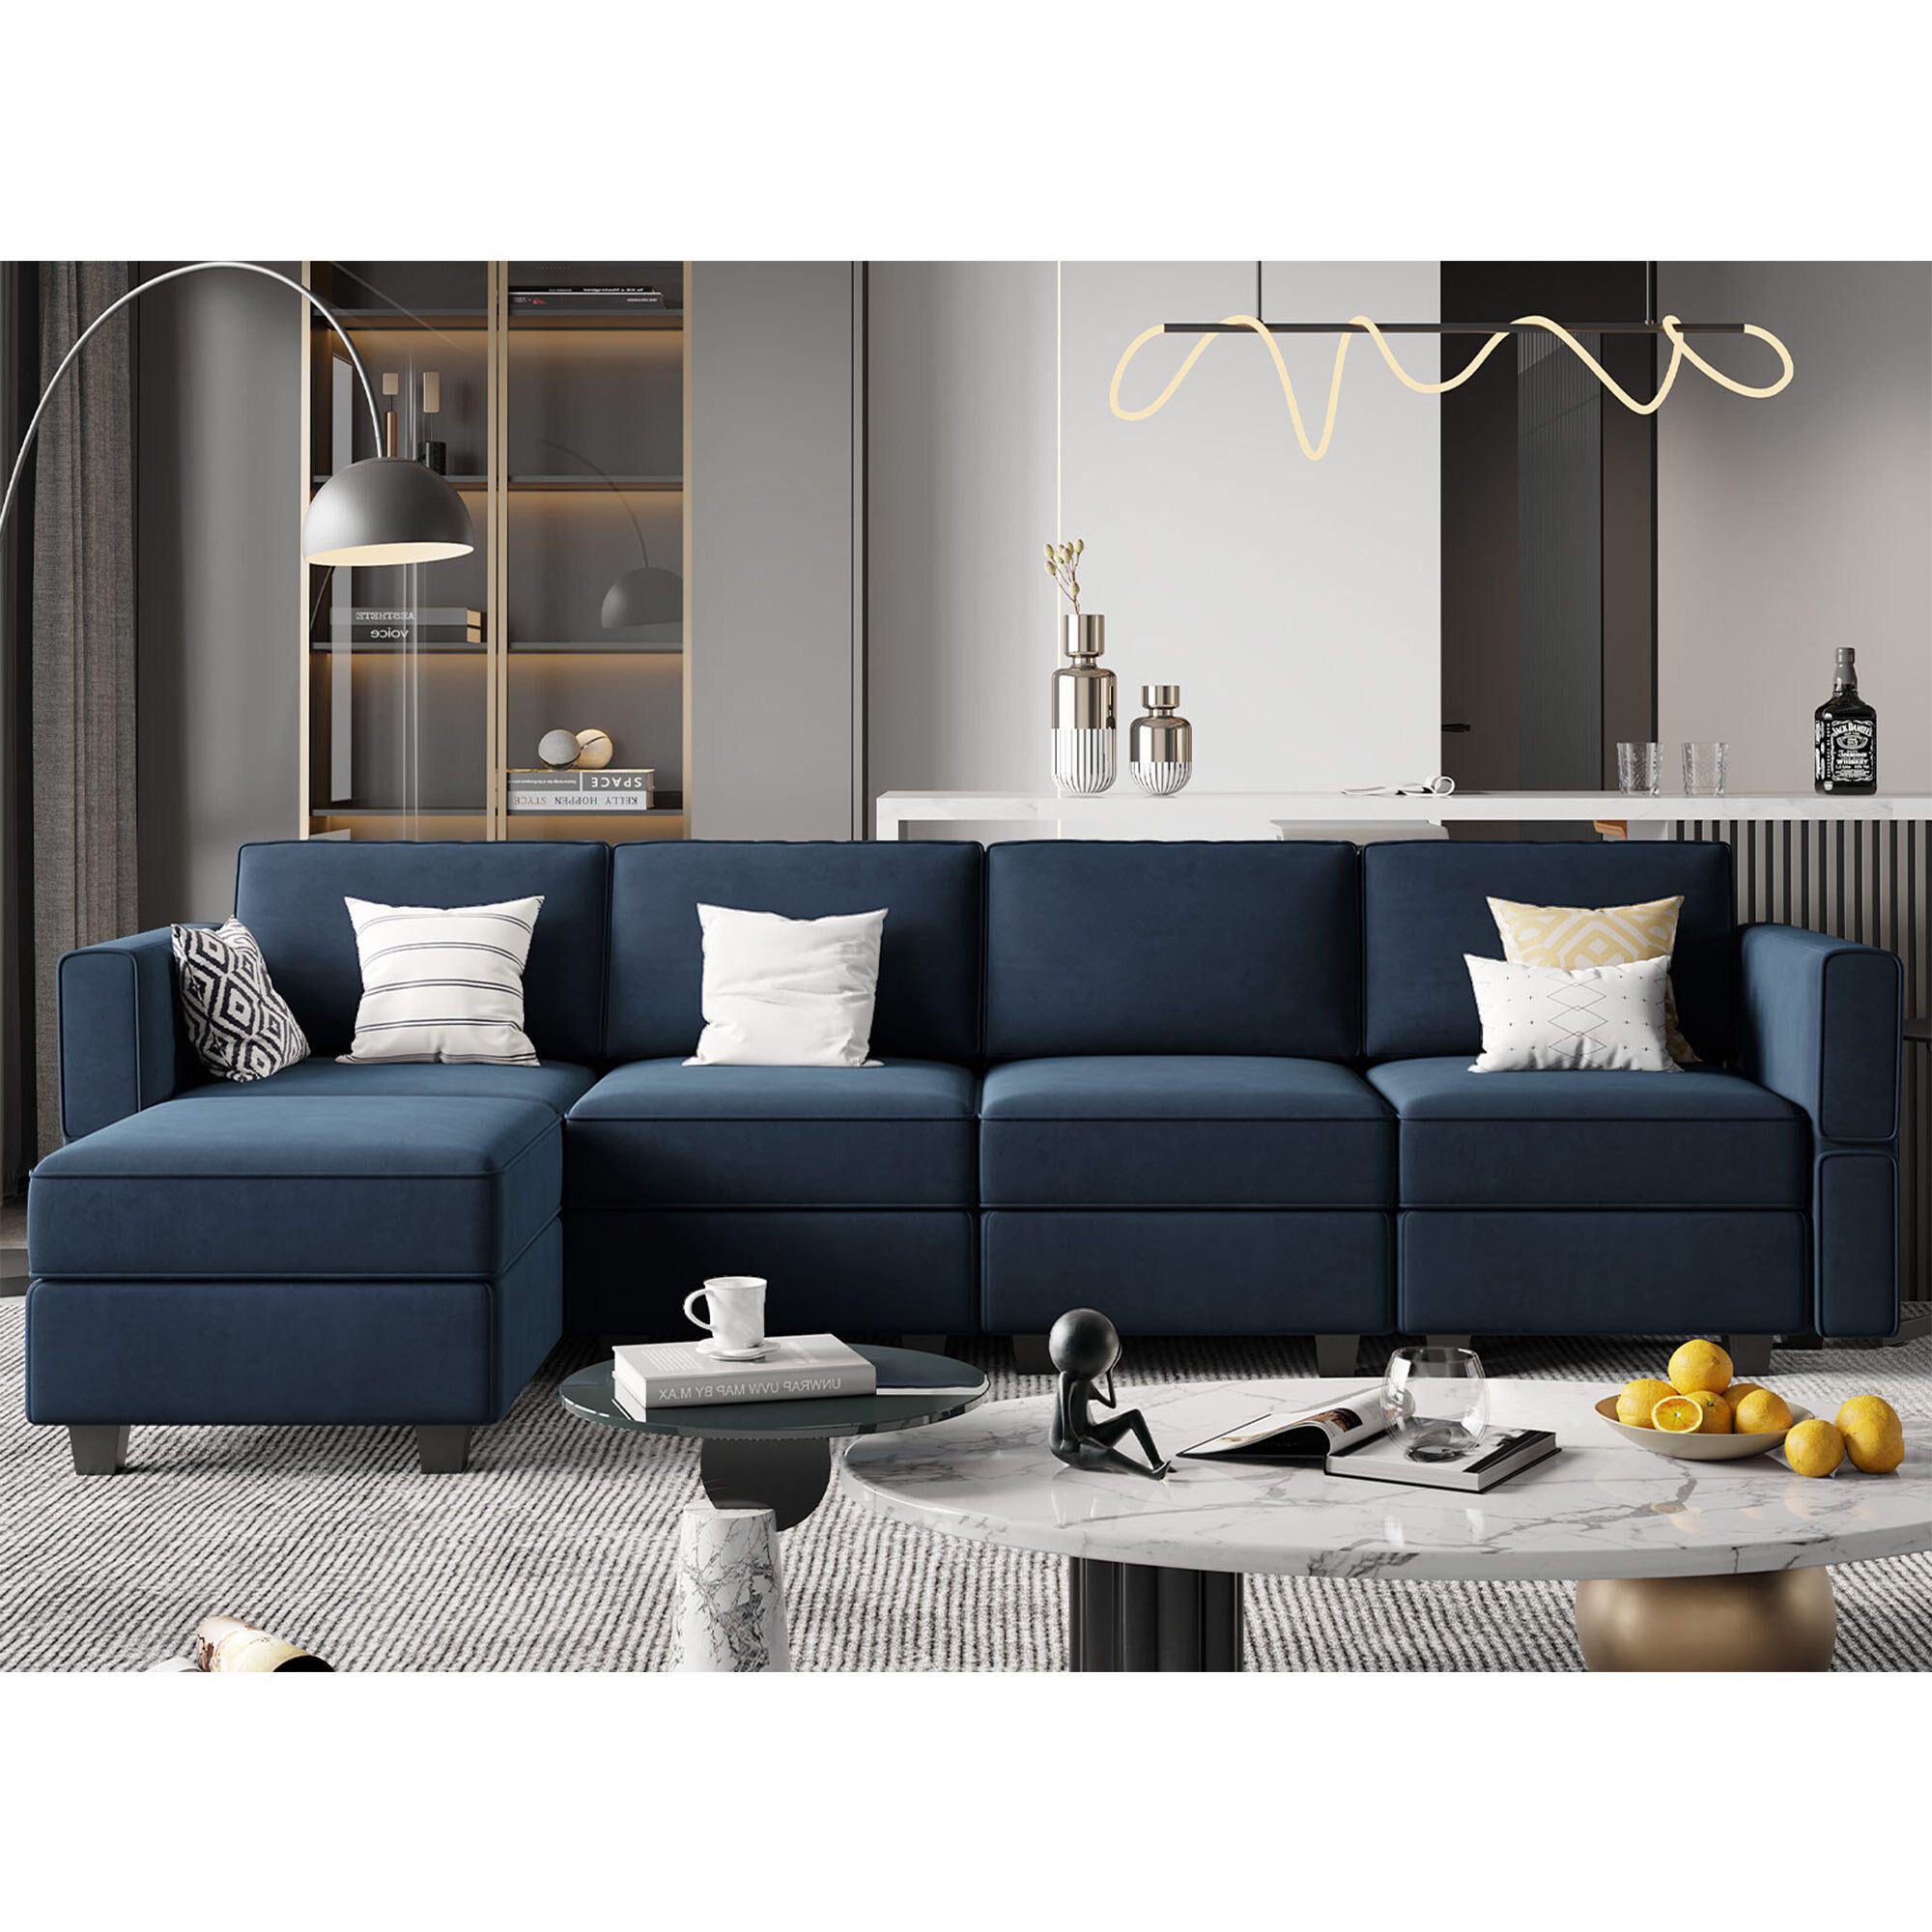 Latitude Run Teangela 116 6 Upholstered Sectional Sofa With Storage Reviews Wayfair Inside Sectional Sofa With Storage 